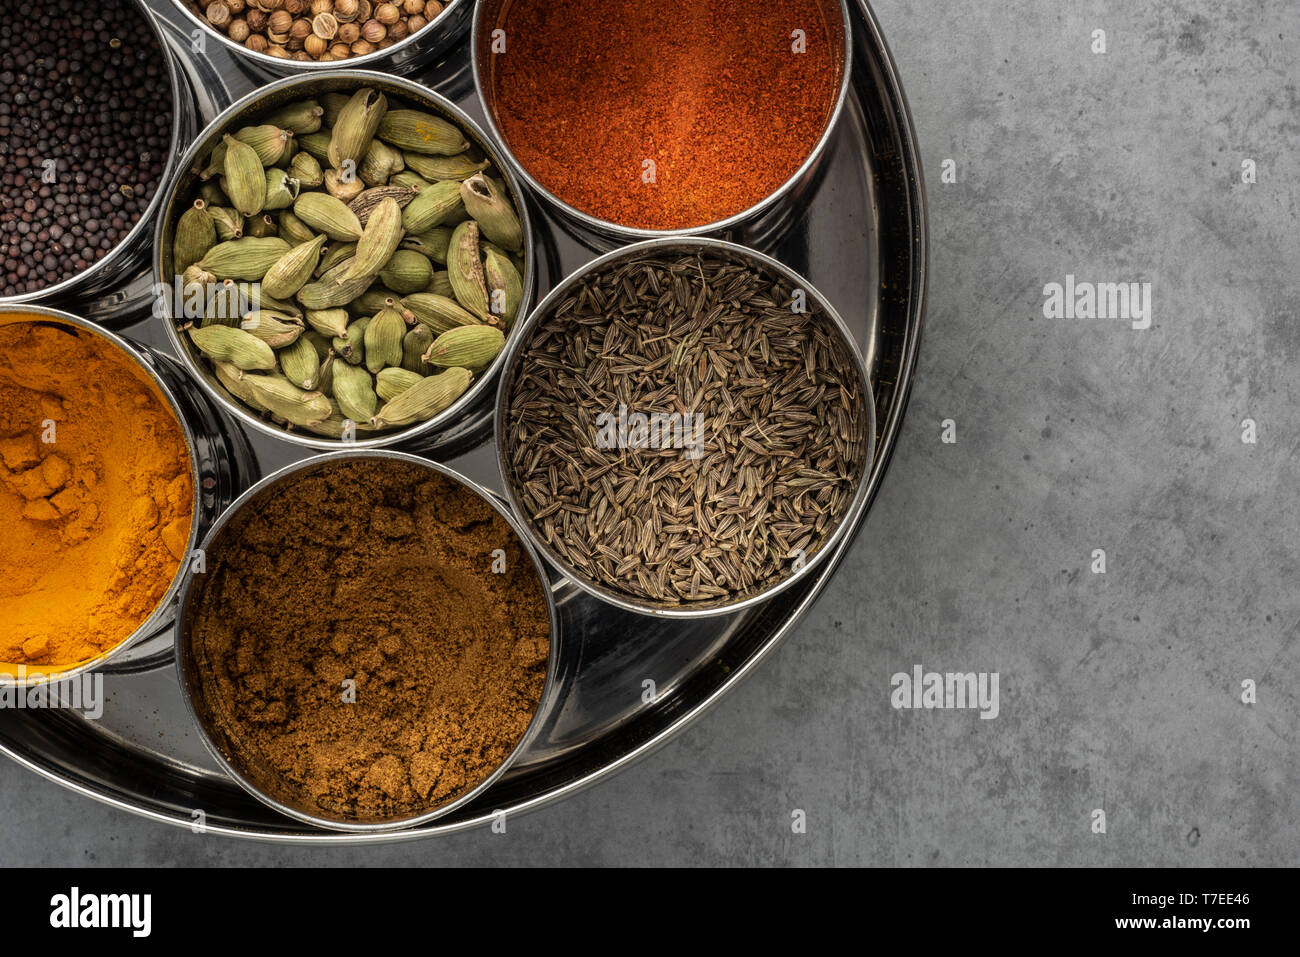 Indian Spice Tin (masala dabba) on cement background seen from above. Stock Photo